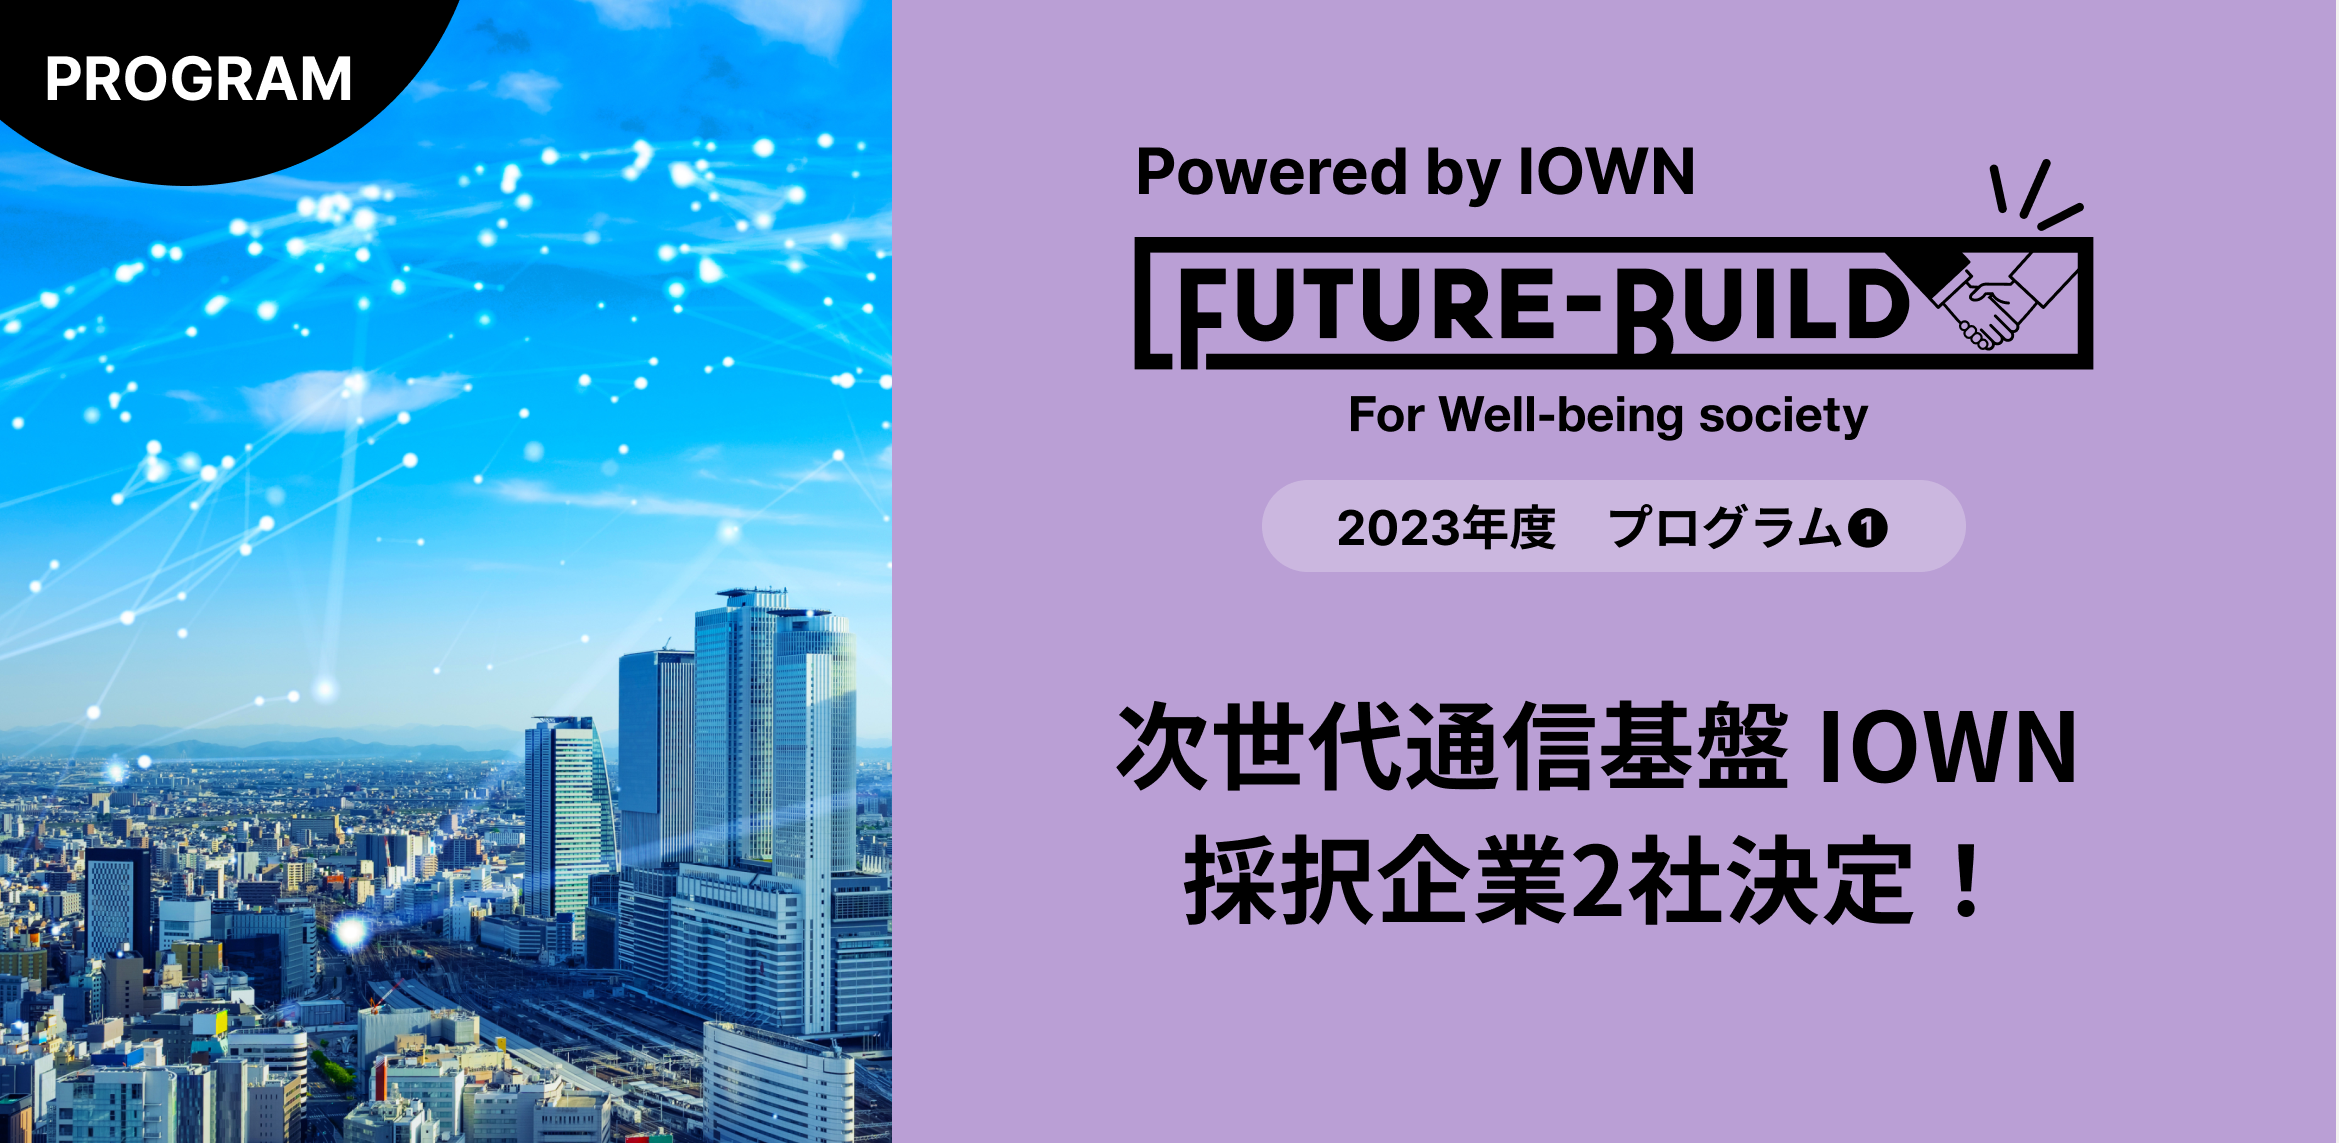 『Future-Build Powered by IOWN』未来共創パートナー決定！